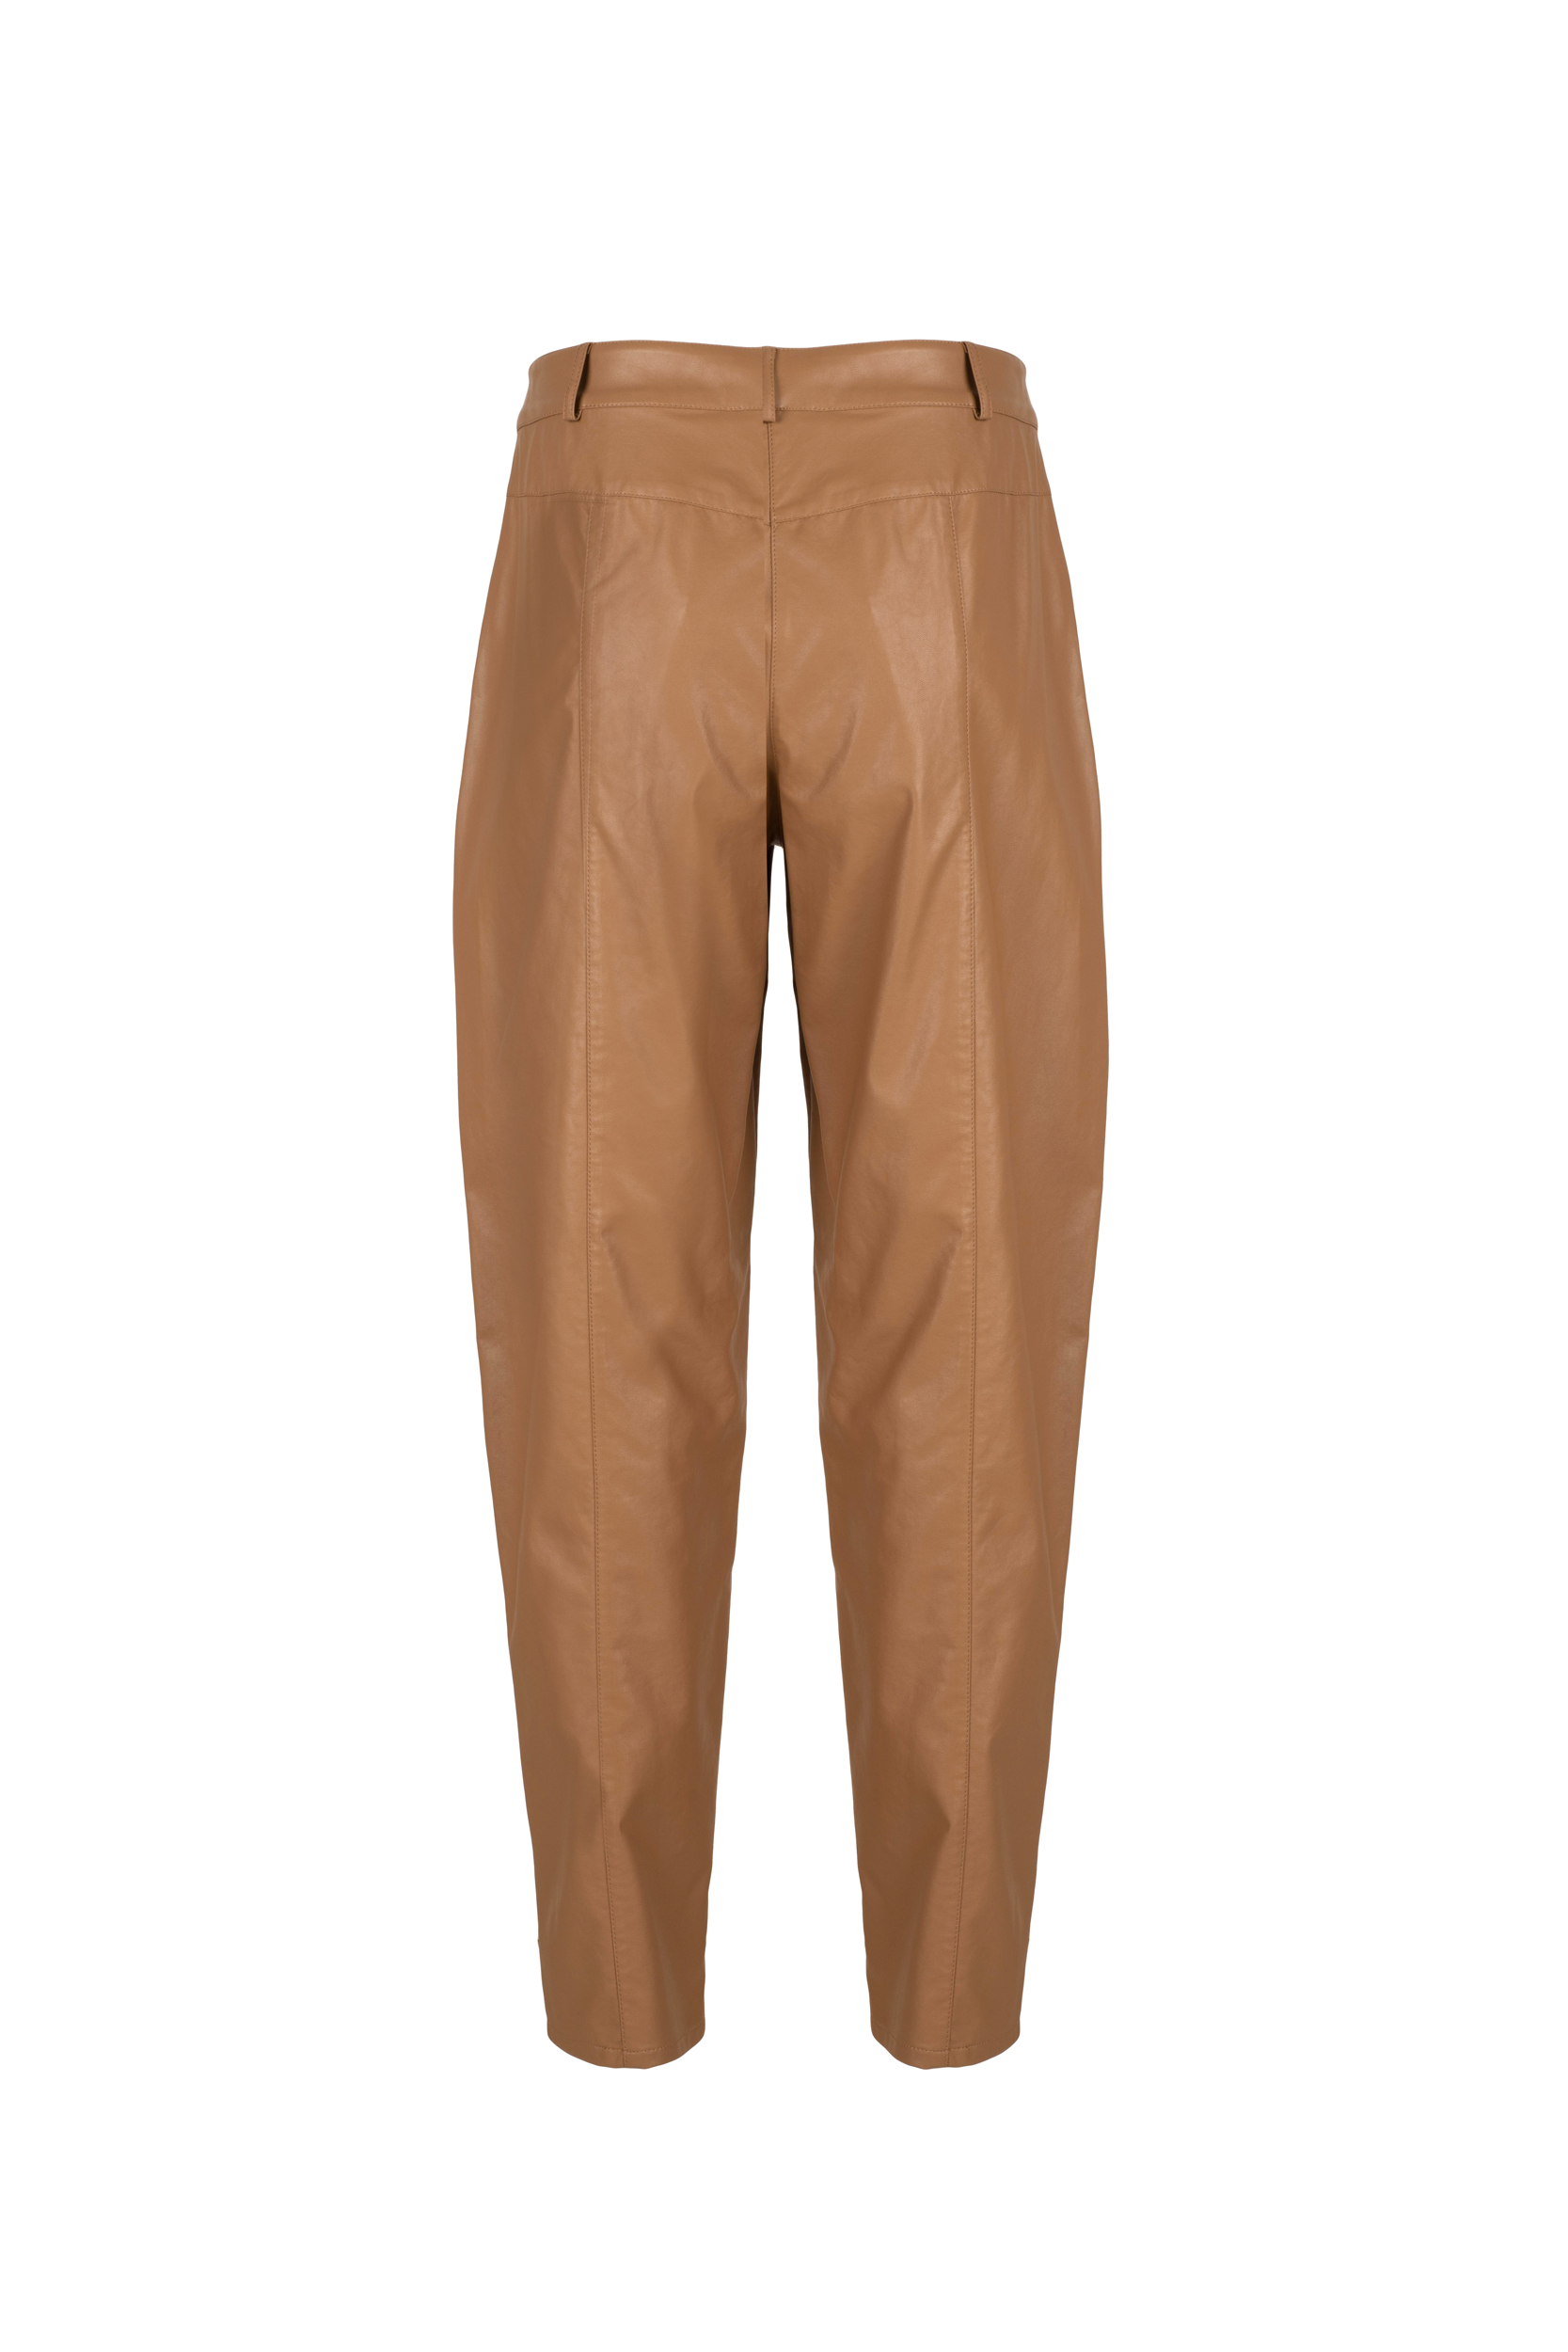 Faux Leather Carrot Trousers with Front Seam and Pockets